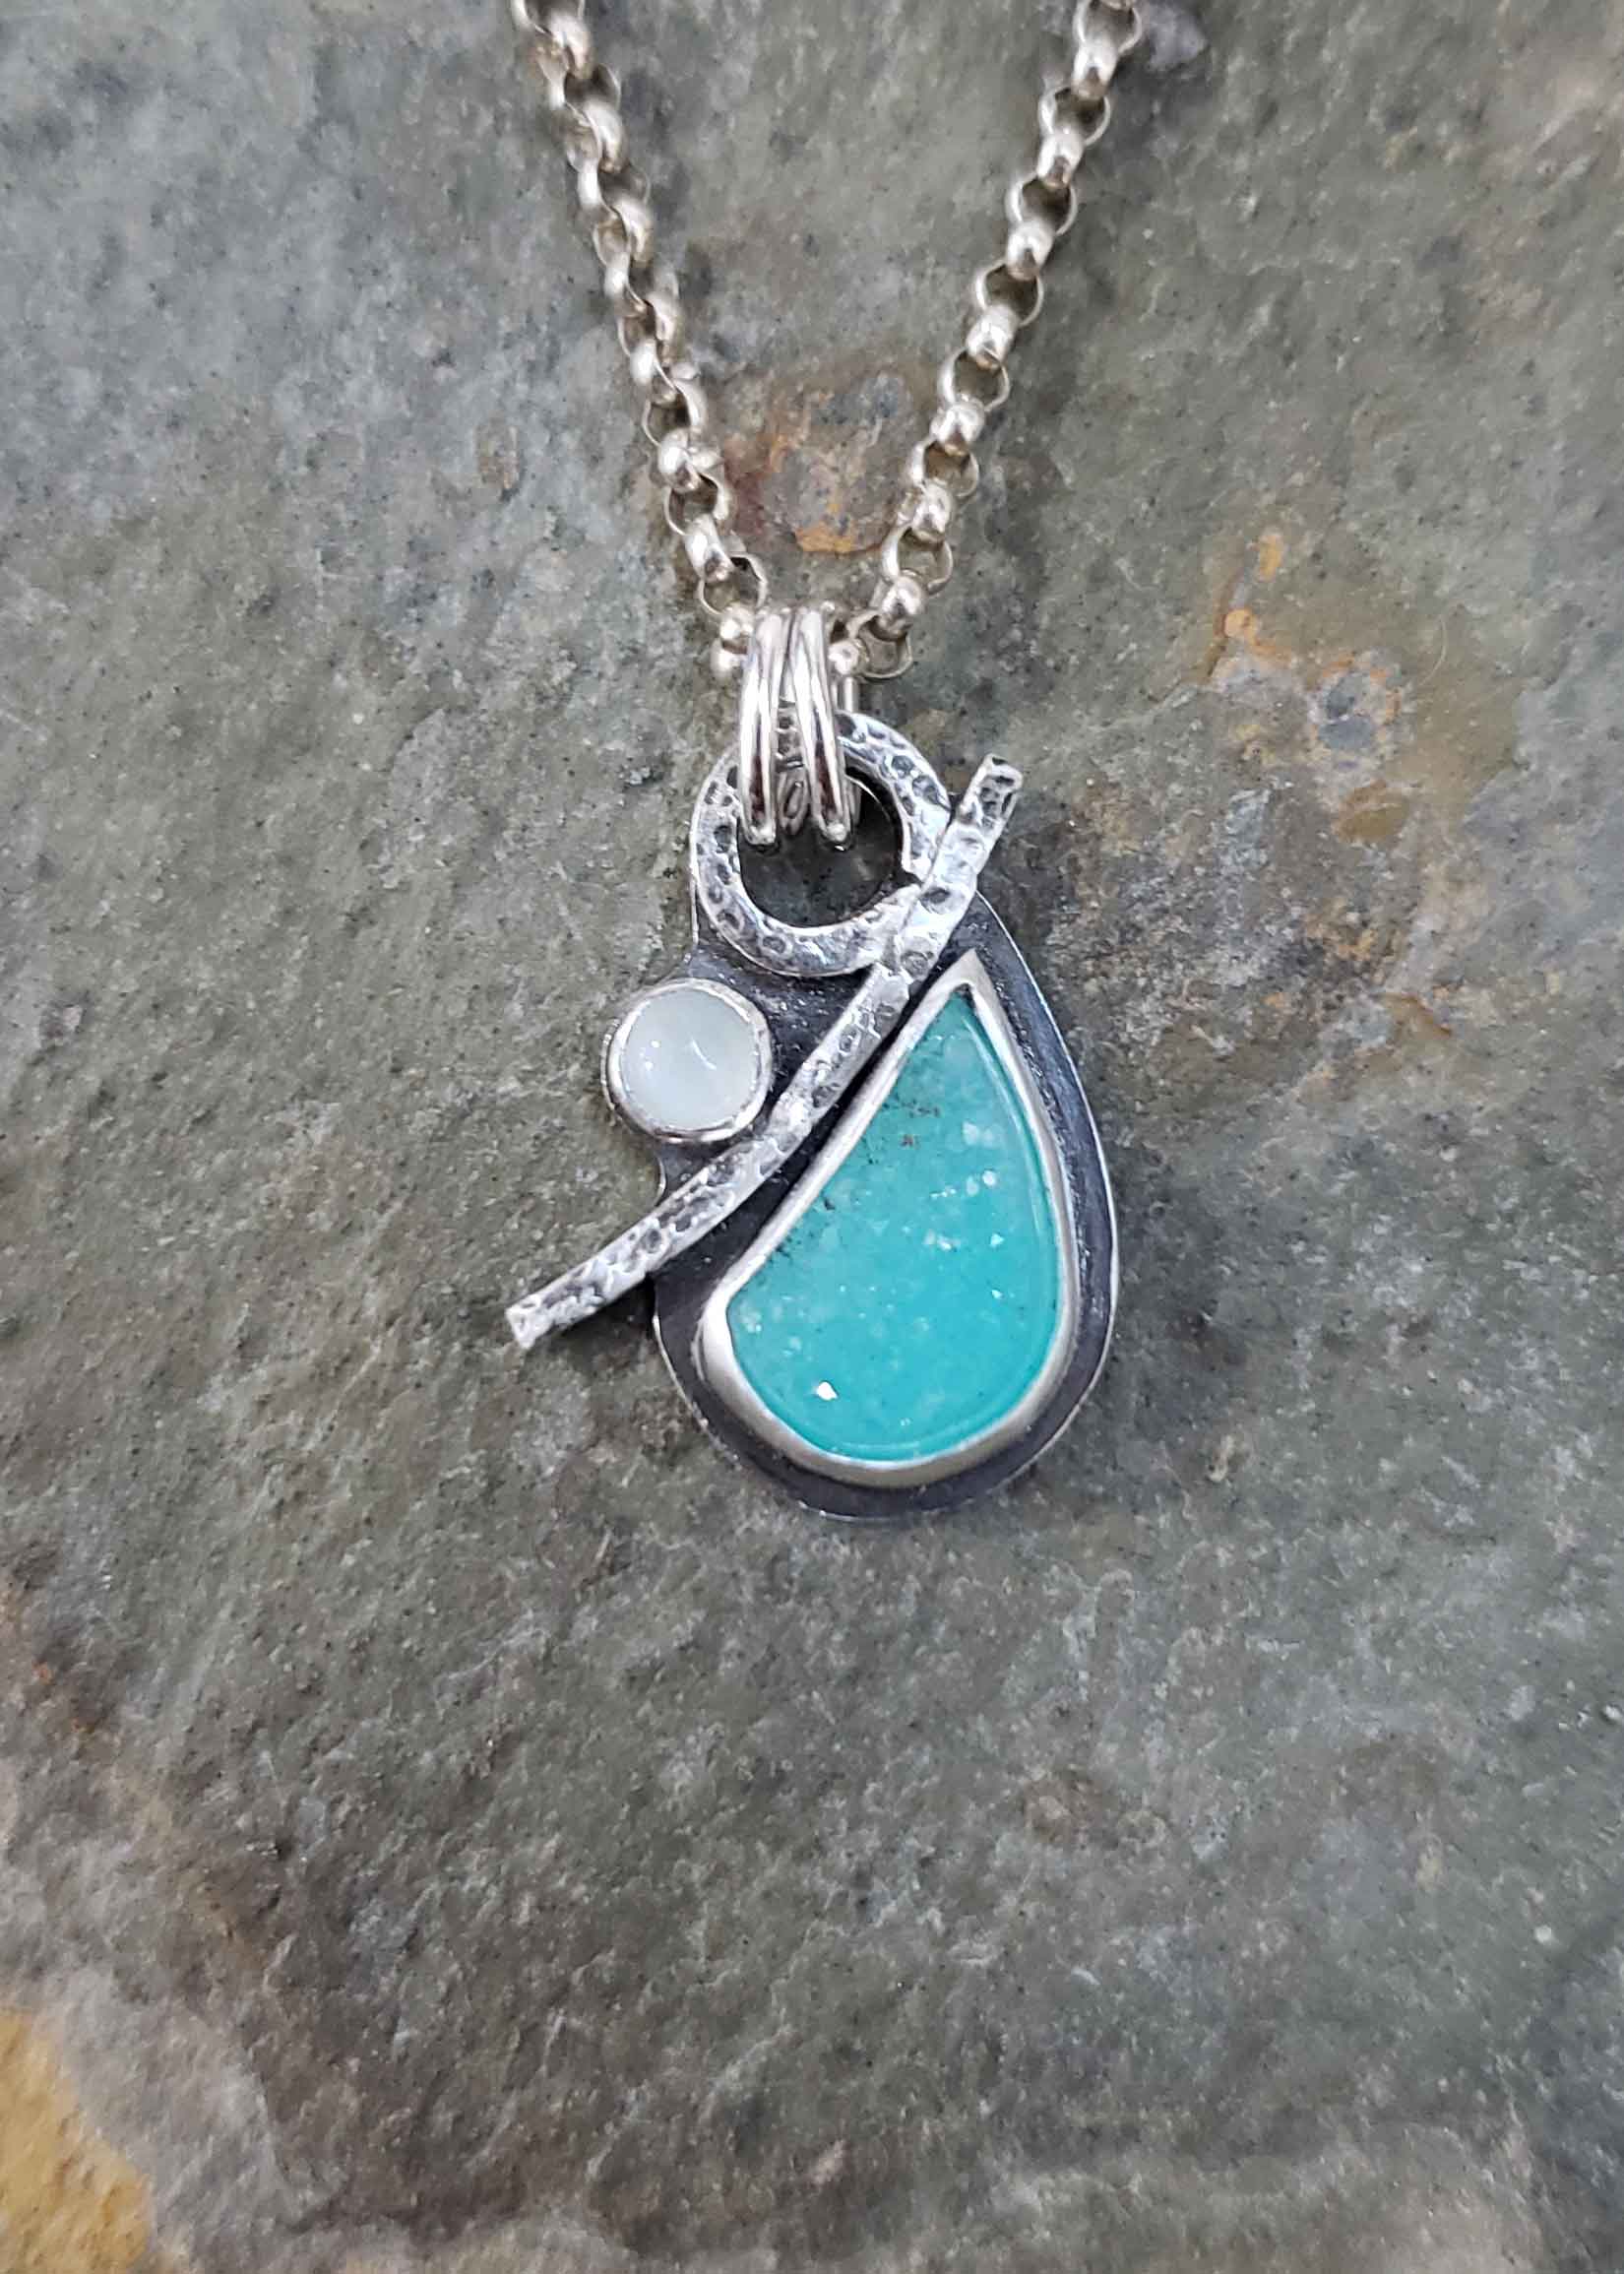 Sparkly turquois blue petite silver pendant by Dona Miller.